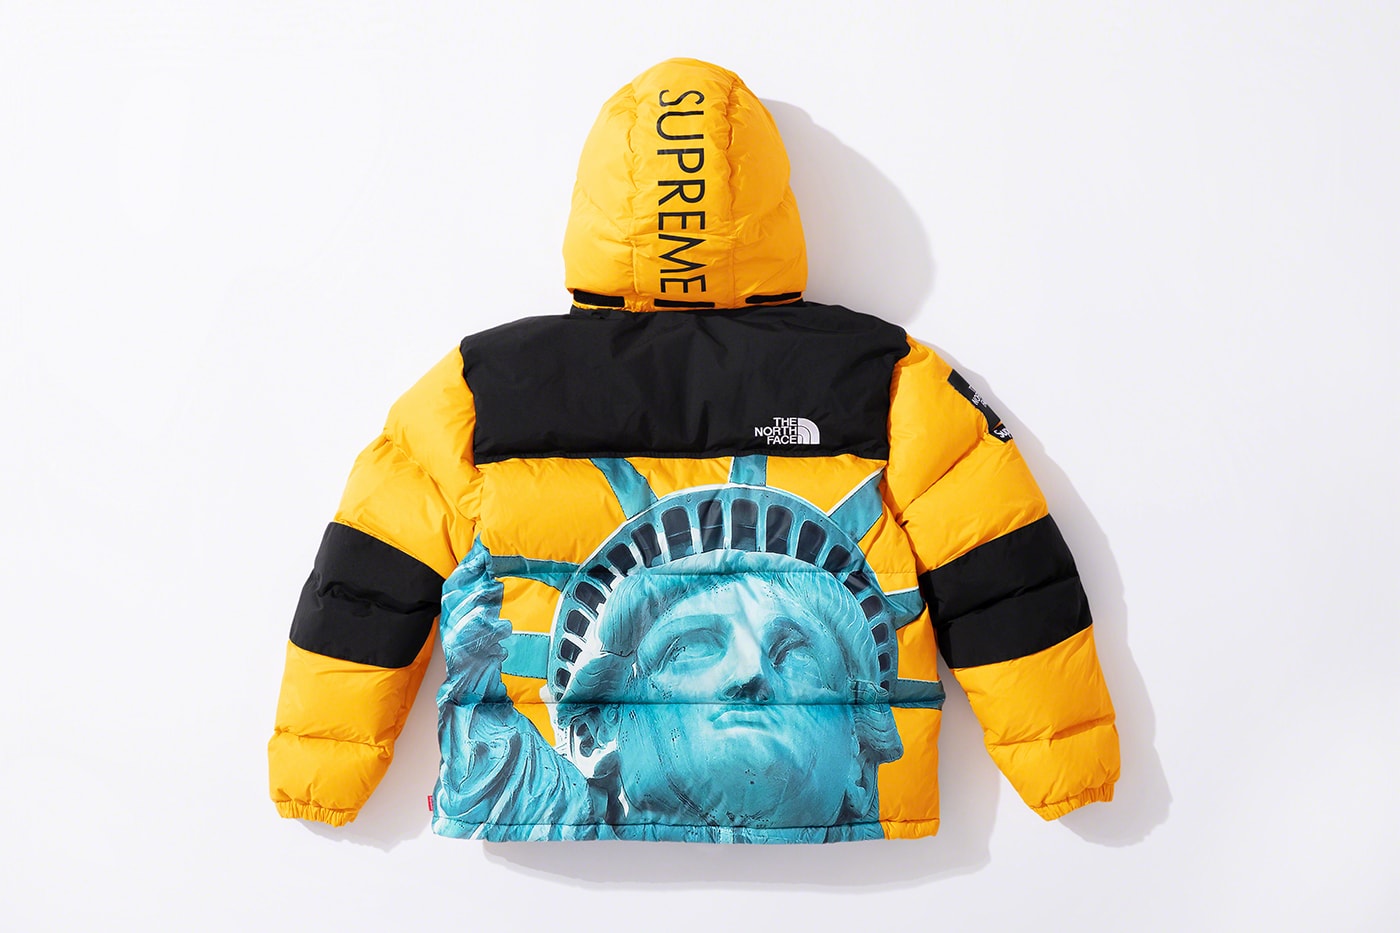 DS New Supreme TNF North Face Mountain Jacket FW 19 Statue of